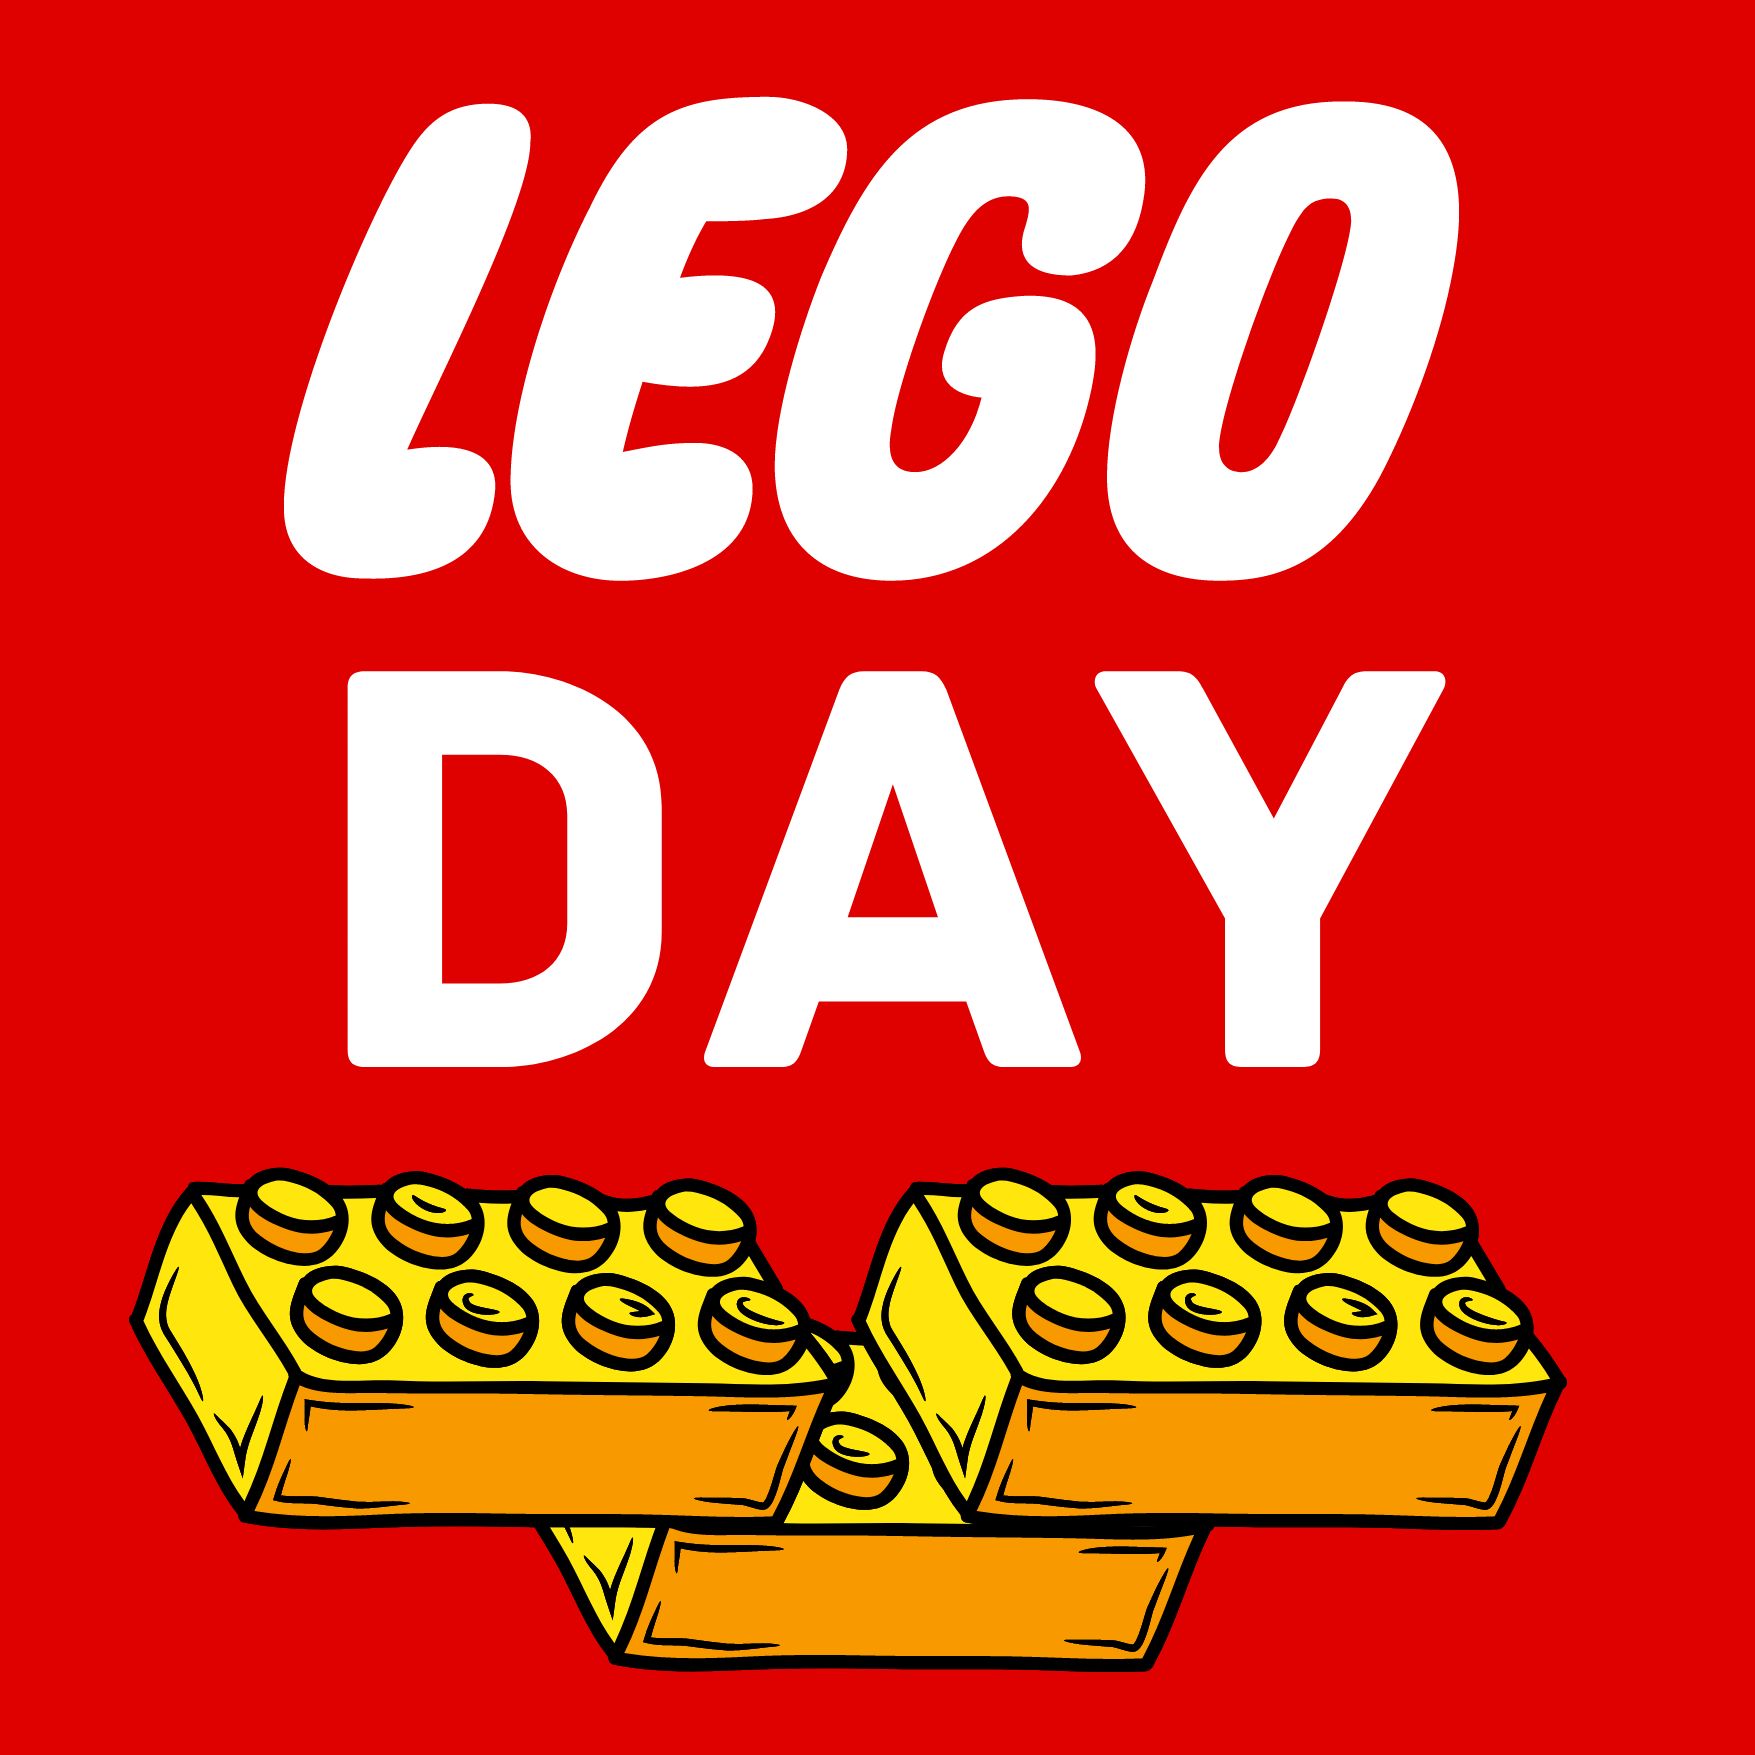 Red background with the words Lego Day and three yellow Lego bricks